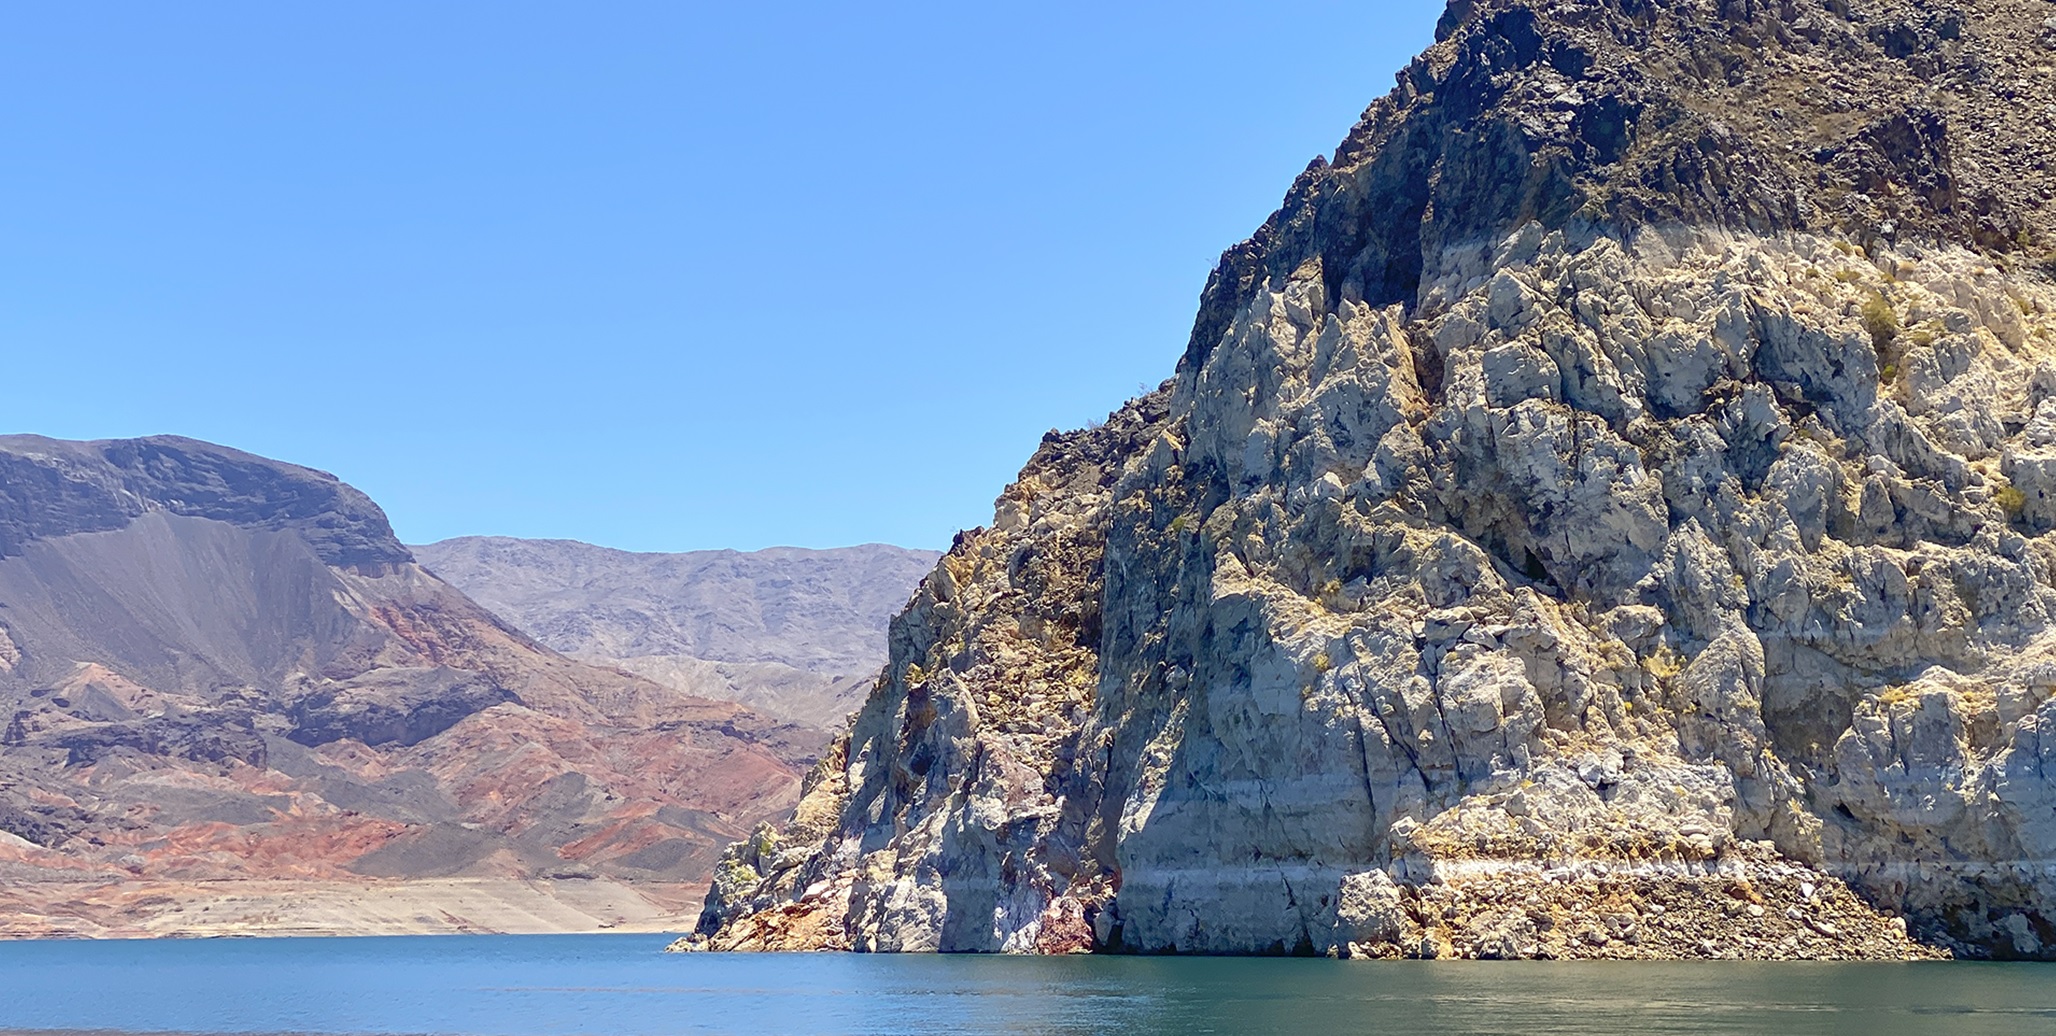 Delcining water level shown on Lake Mead